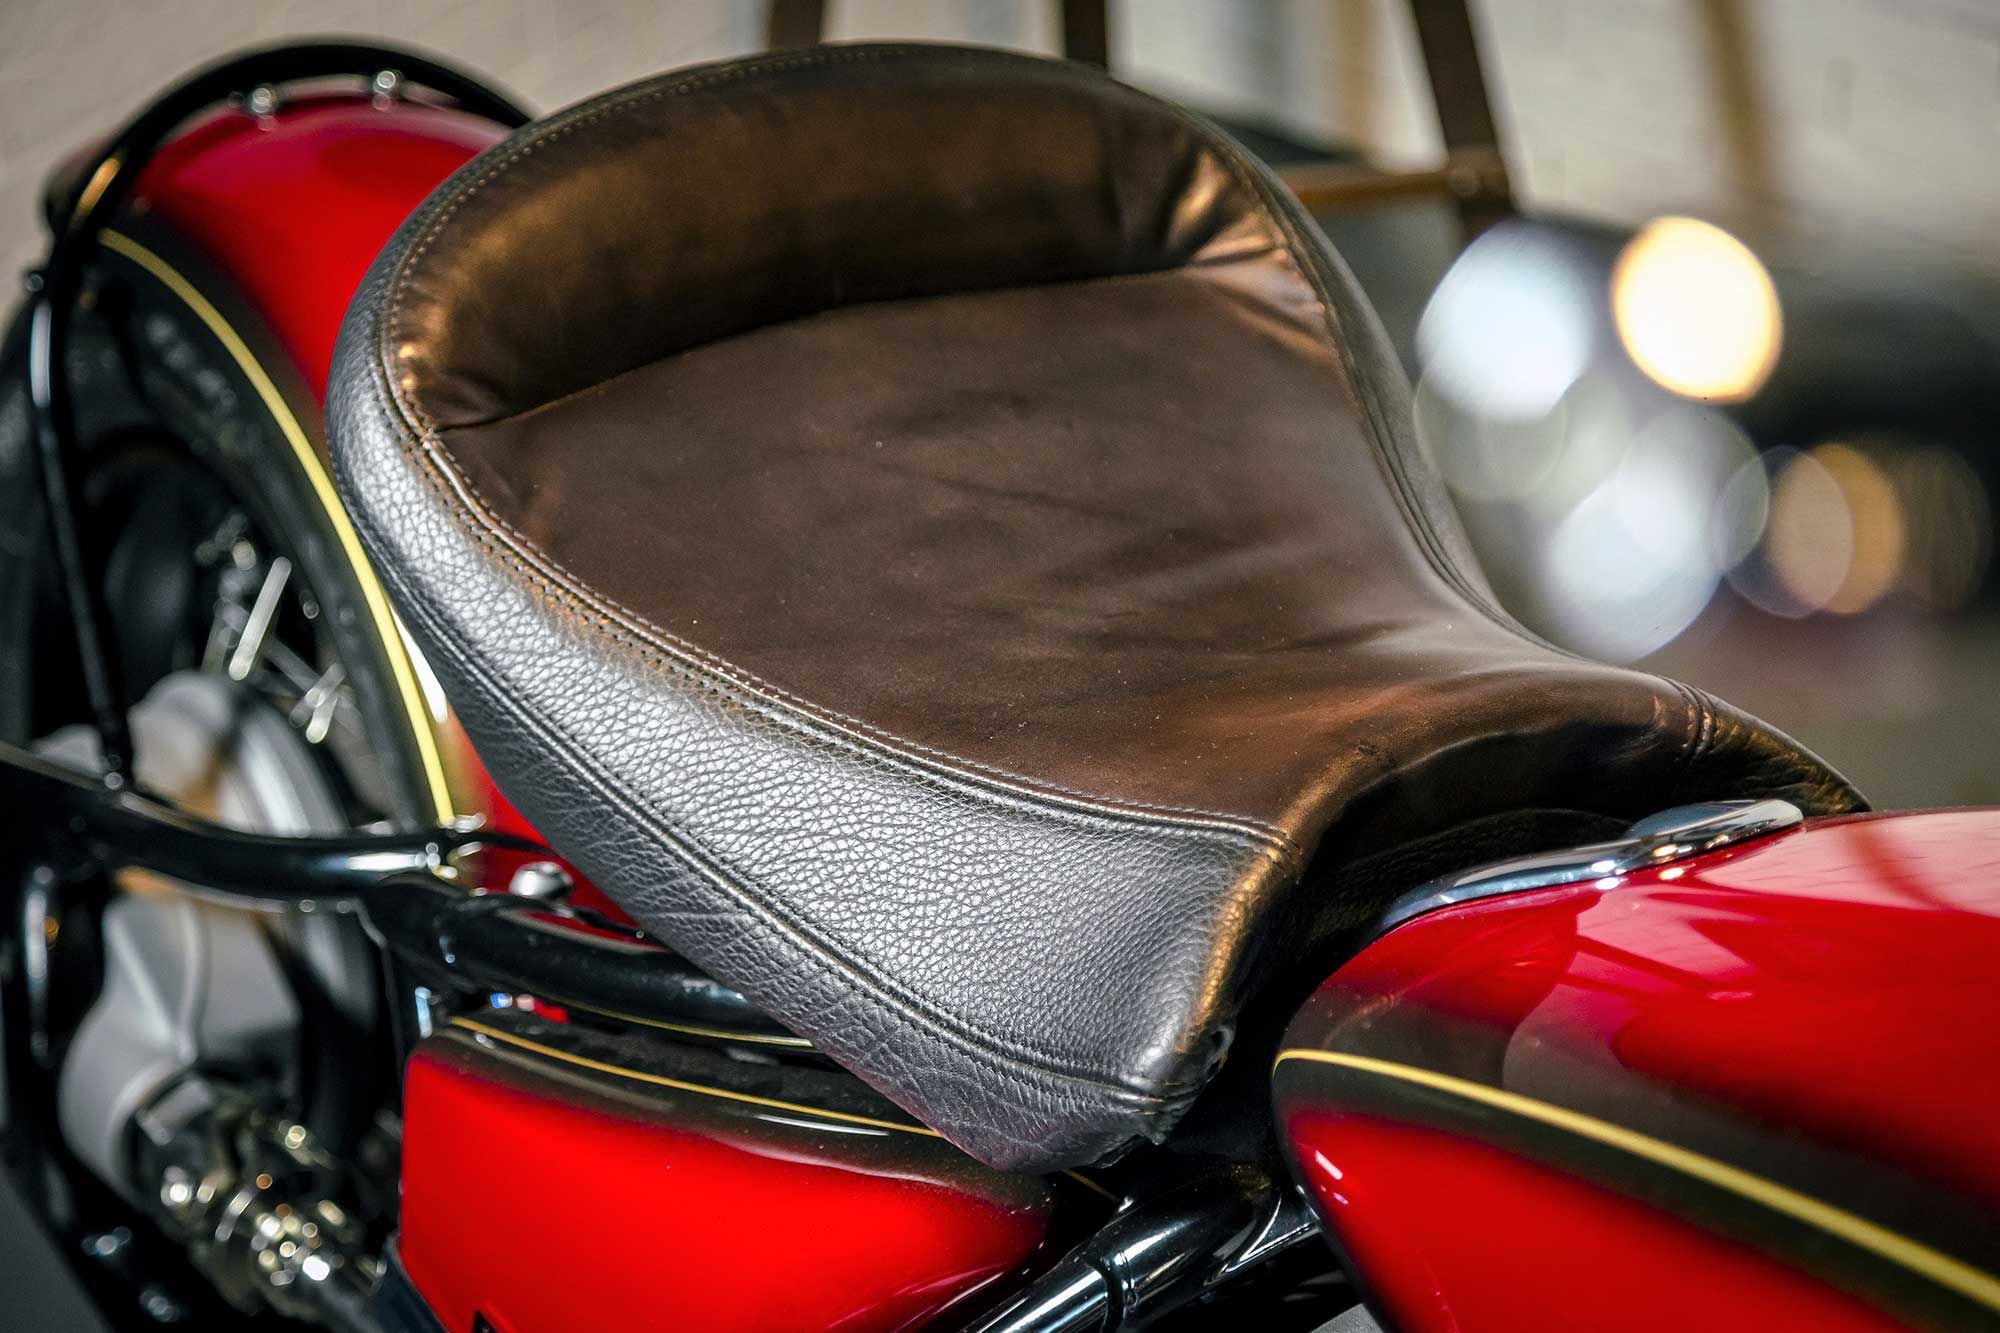 Parts from other BMWs contributed to the final build. The seat is off an old 1200 C.